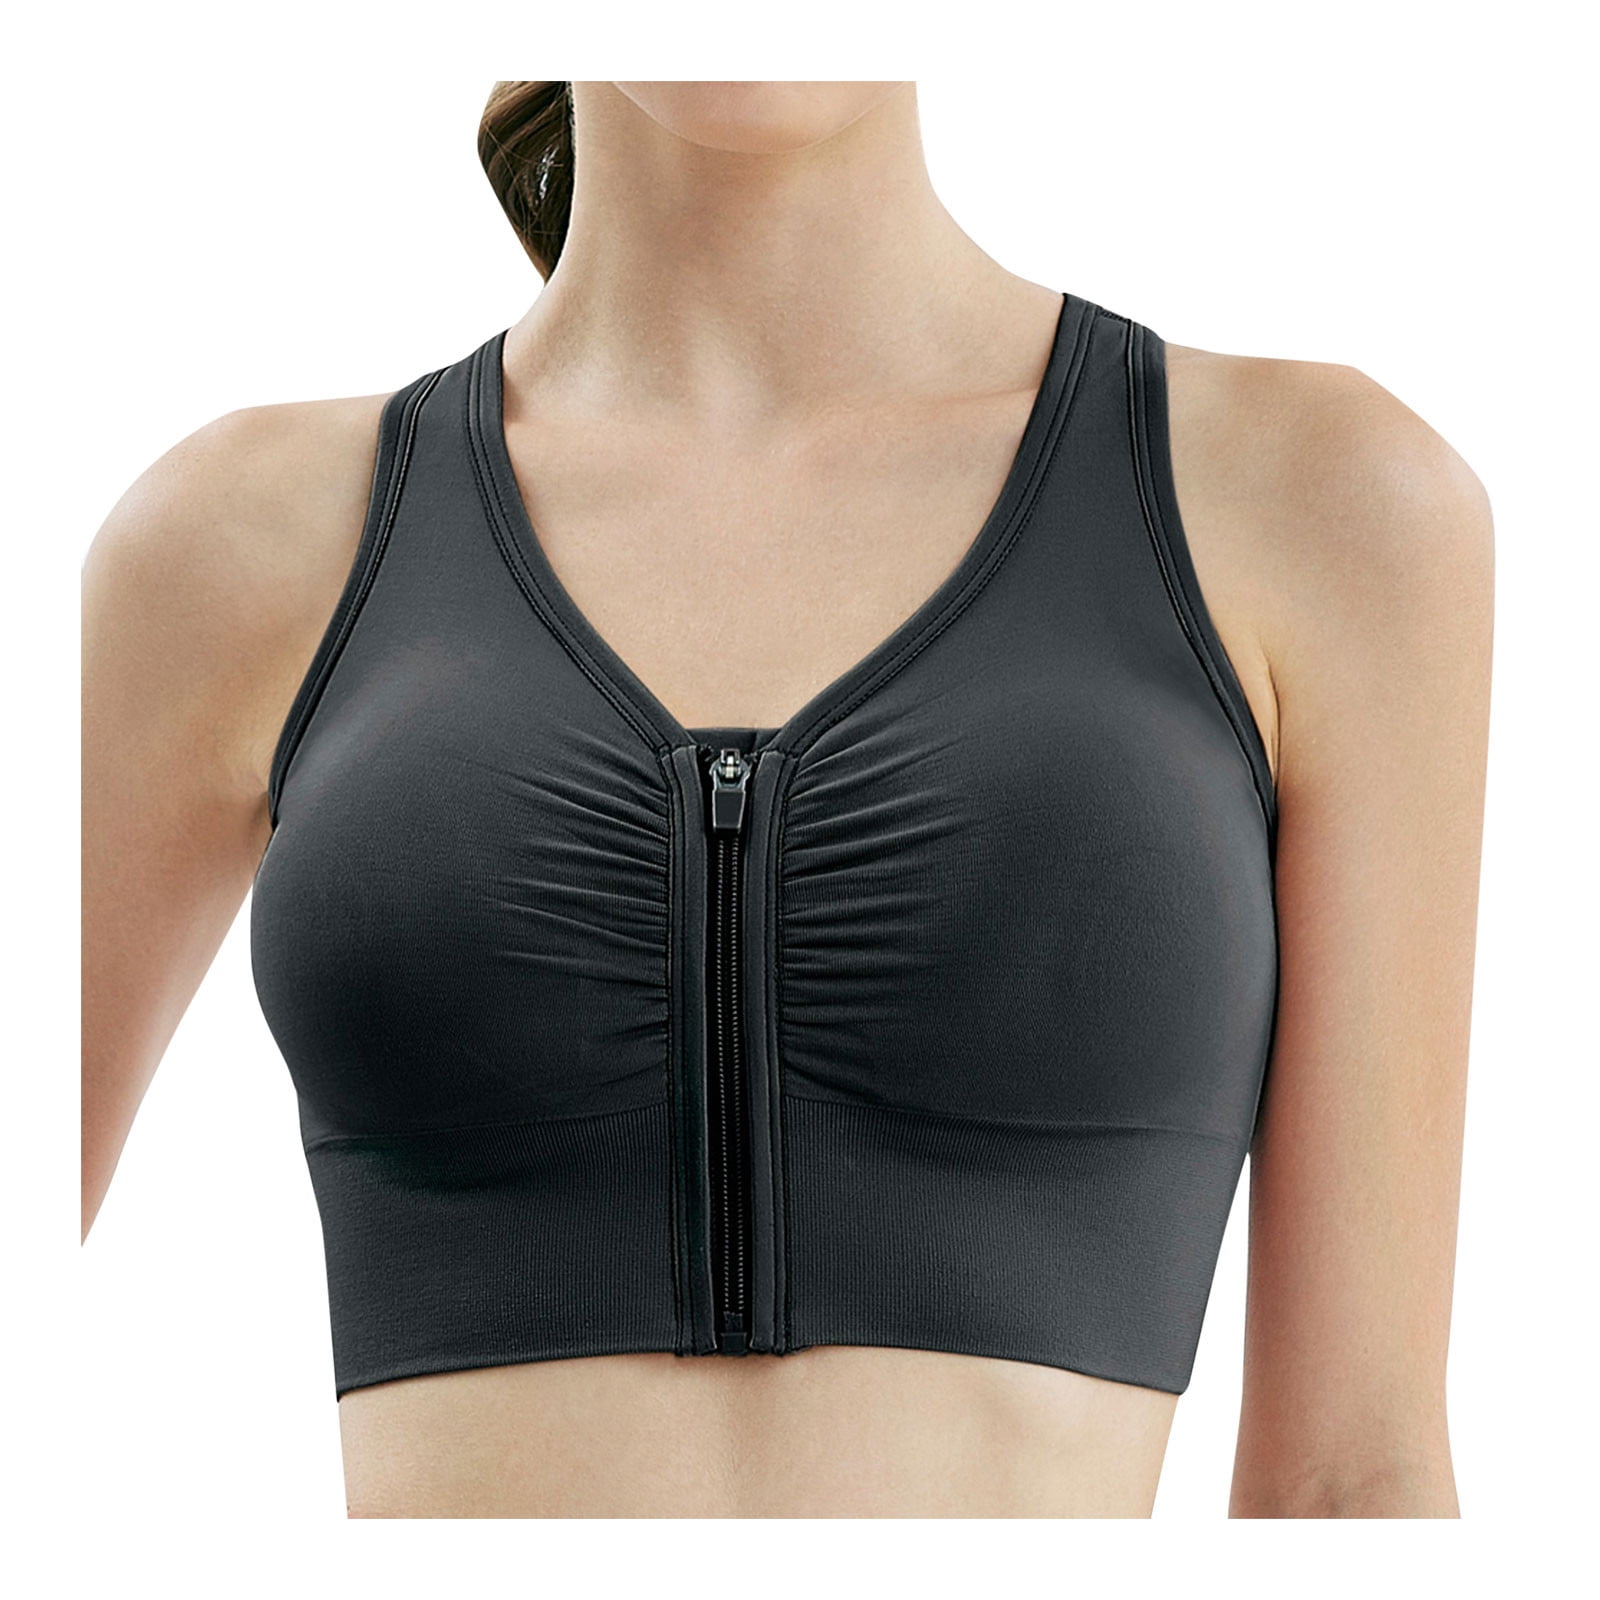 Women/'s Medium Support Cross-Back No Steel Ring Removable Cup Yoga Sports Bra